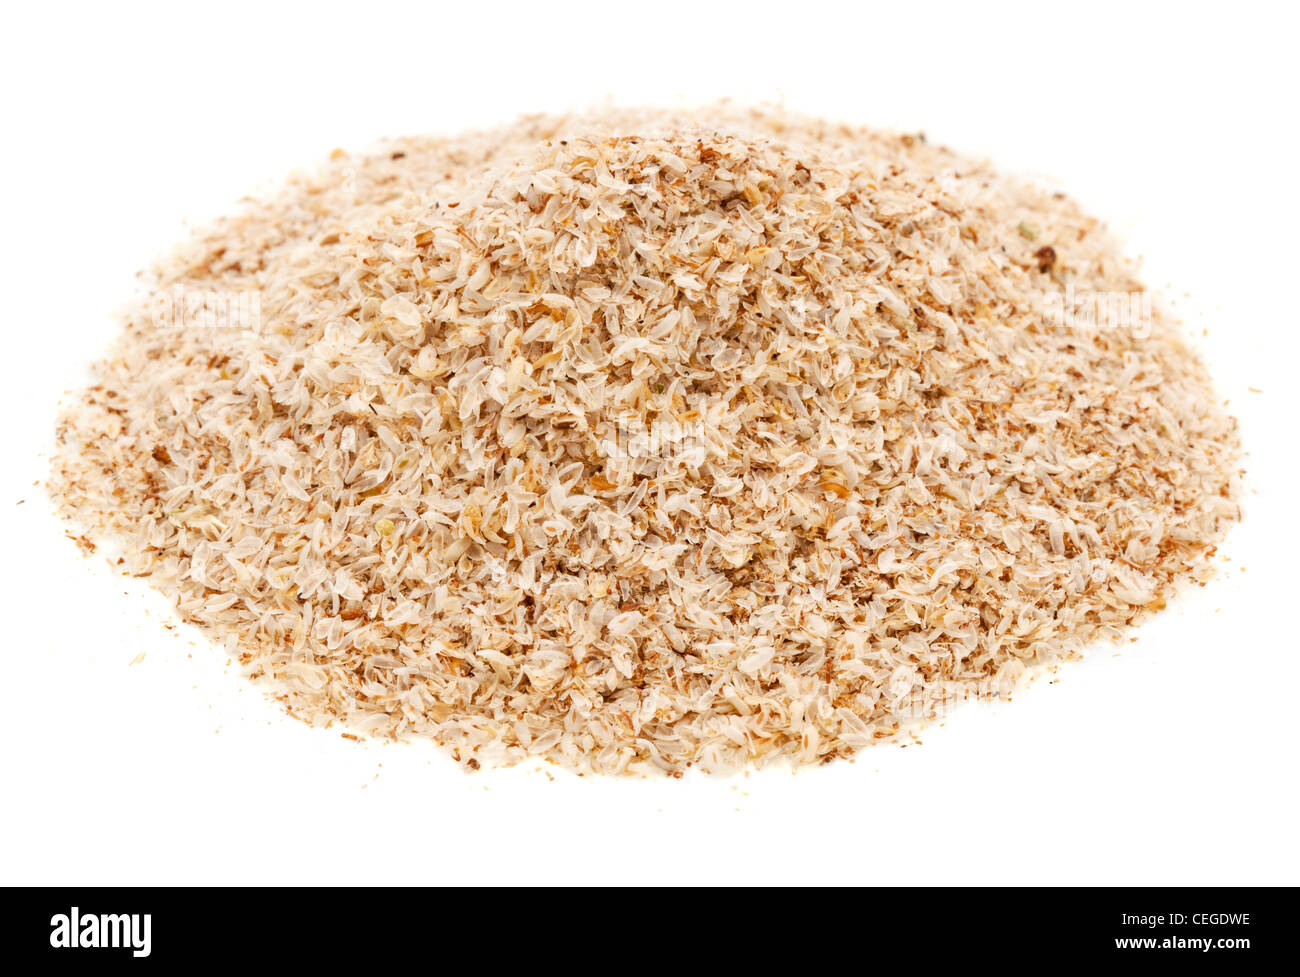 a pile of psyllium seed husks,dietary supplement, source of soluble fiber Stock Photo